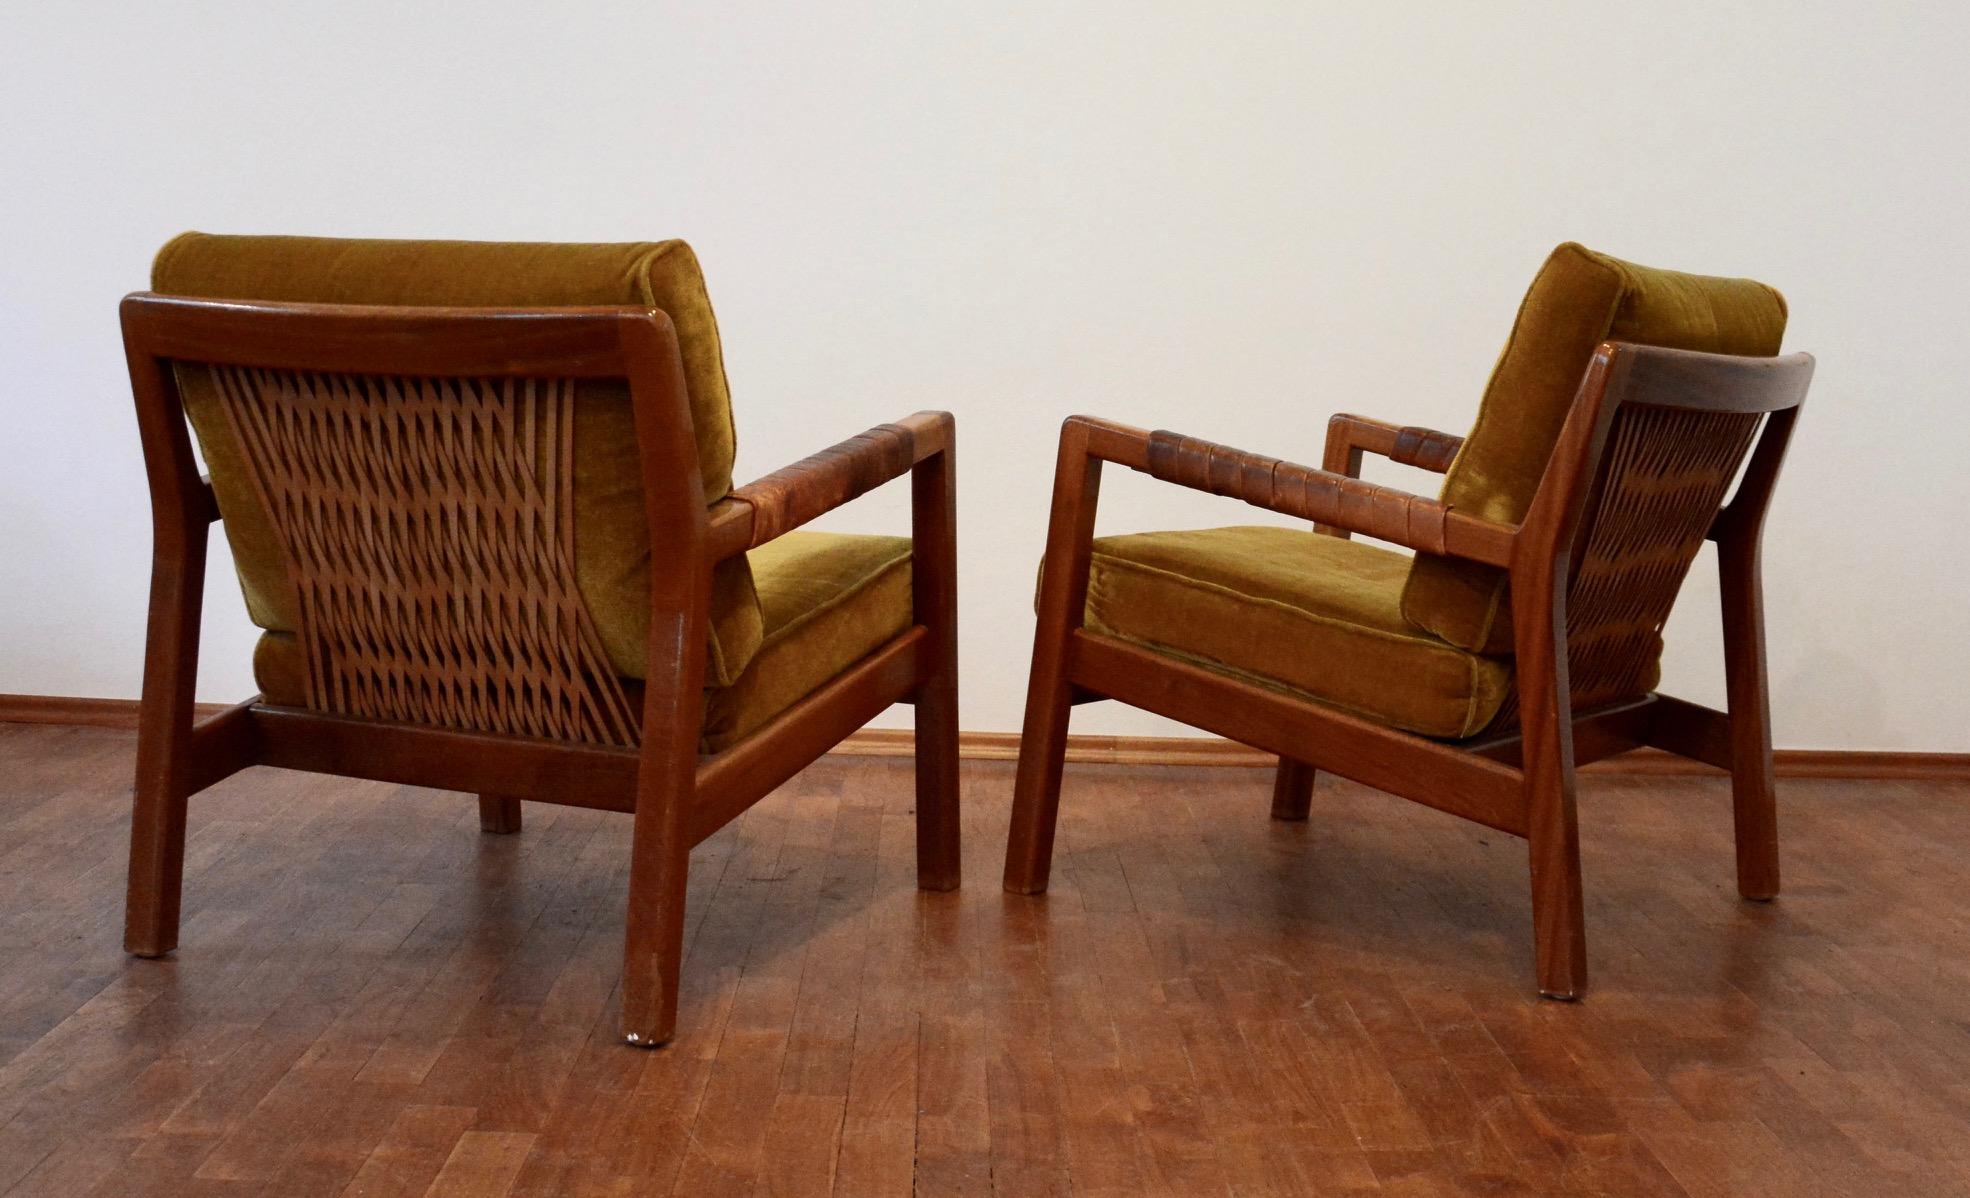 Mid-20th Century Midcentury Trienna Lounge Chairs by Carl Gustav Hiort af Ornäs, Finland, 1960s